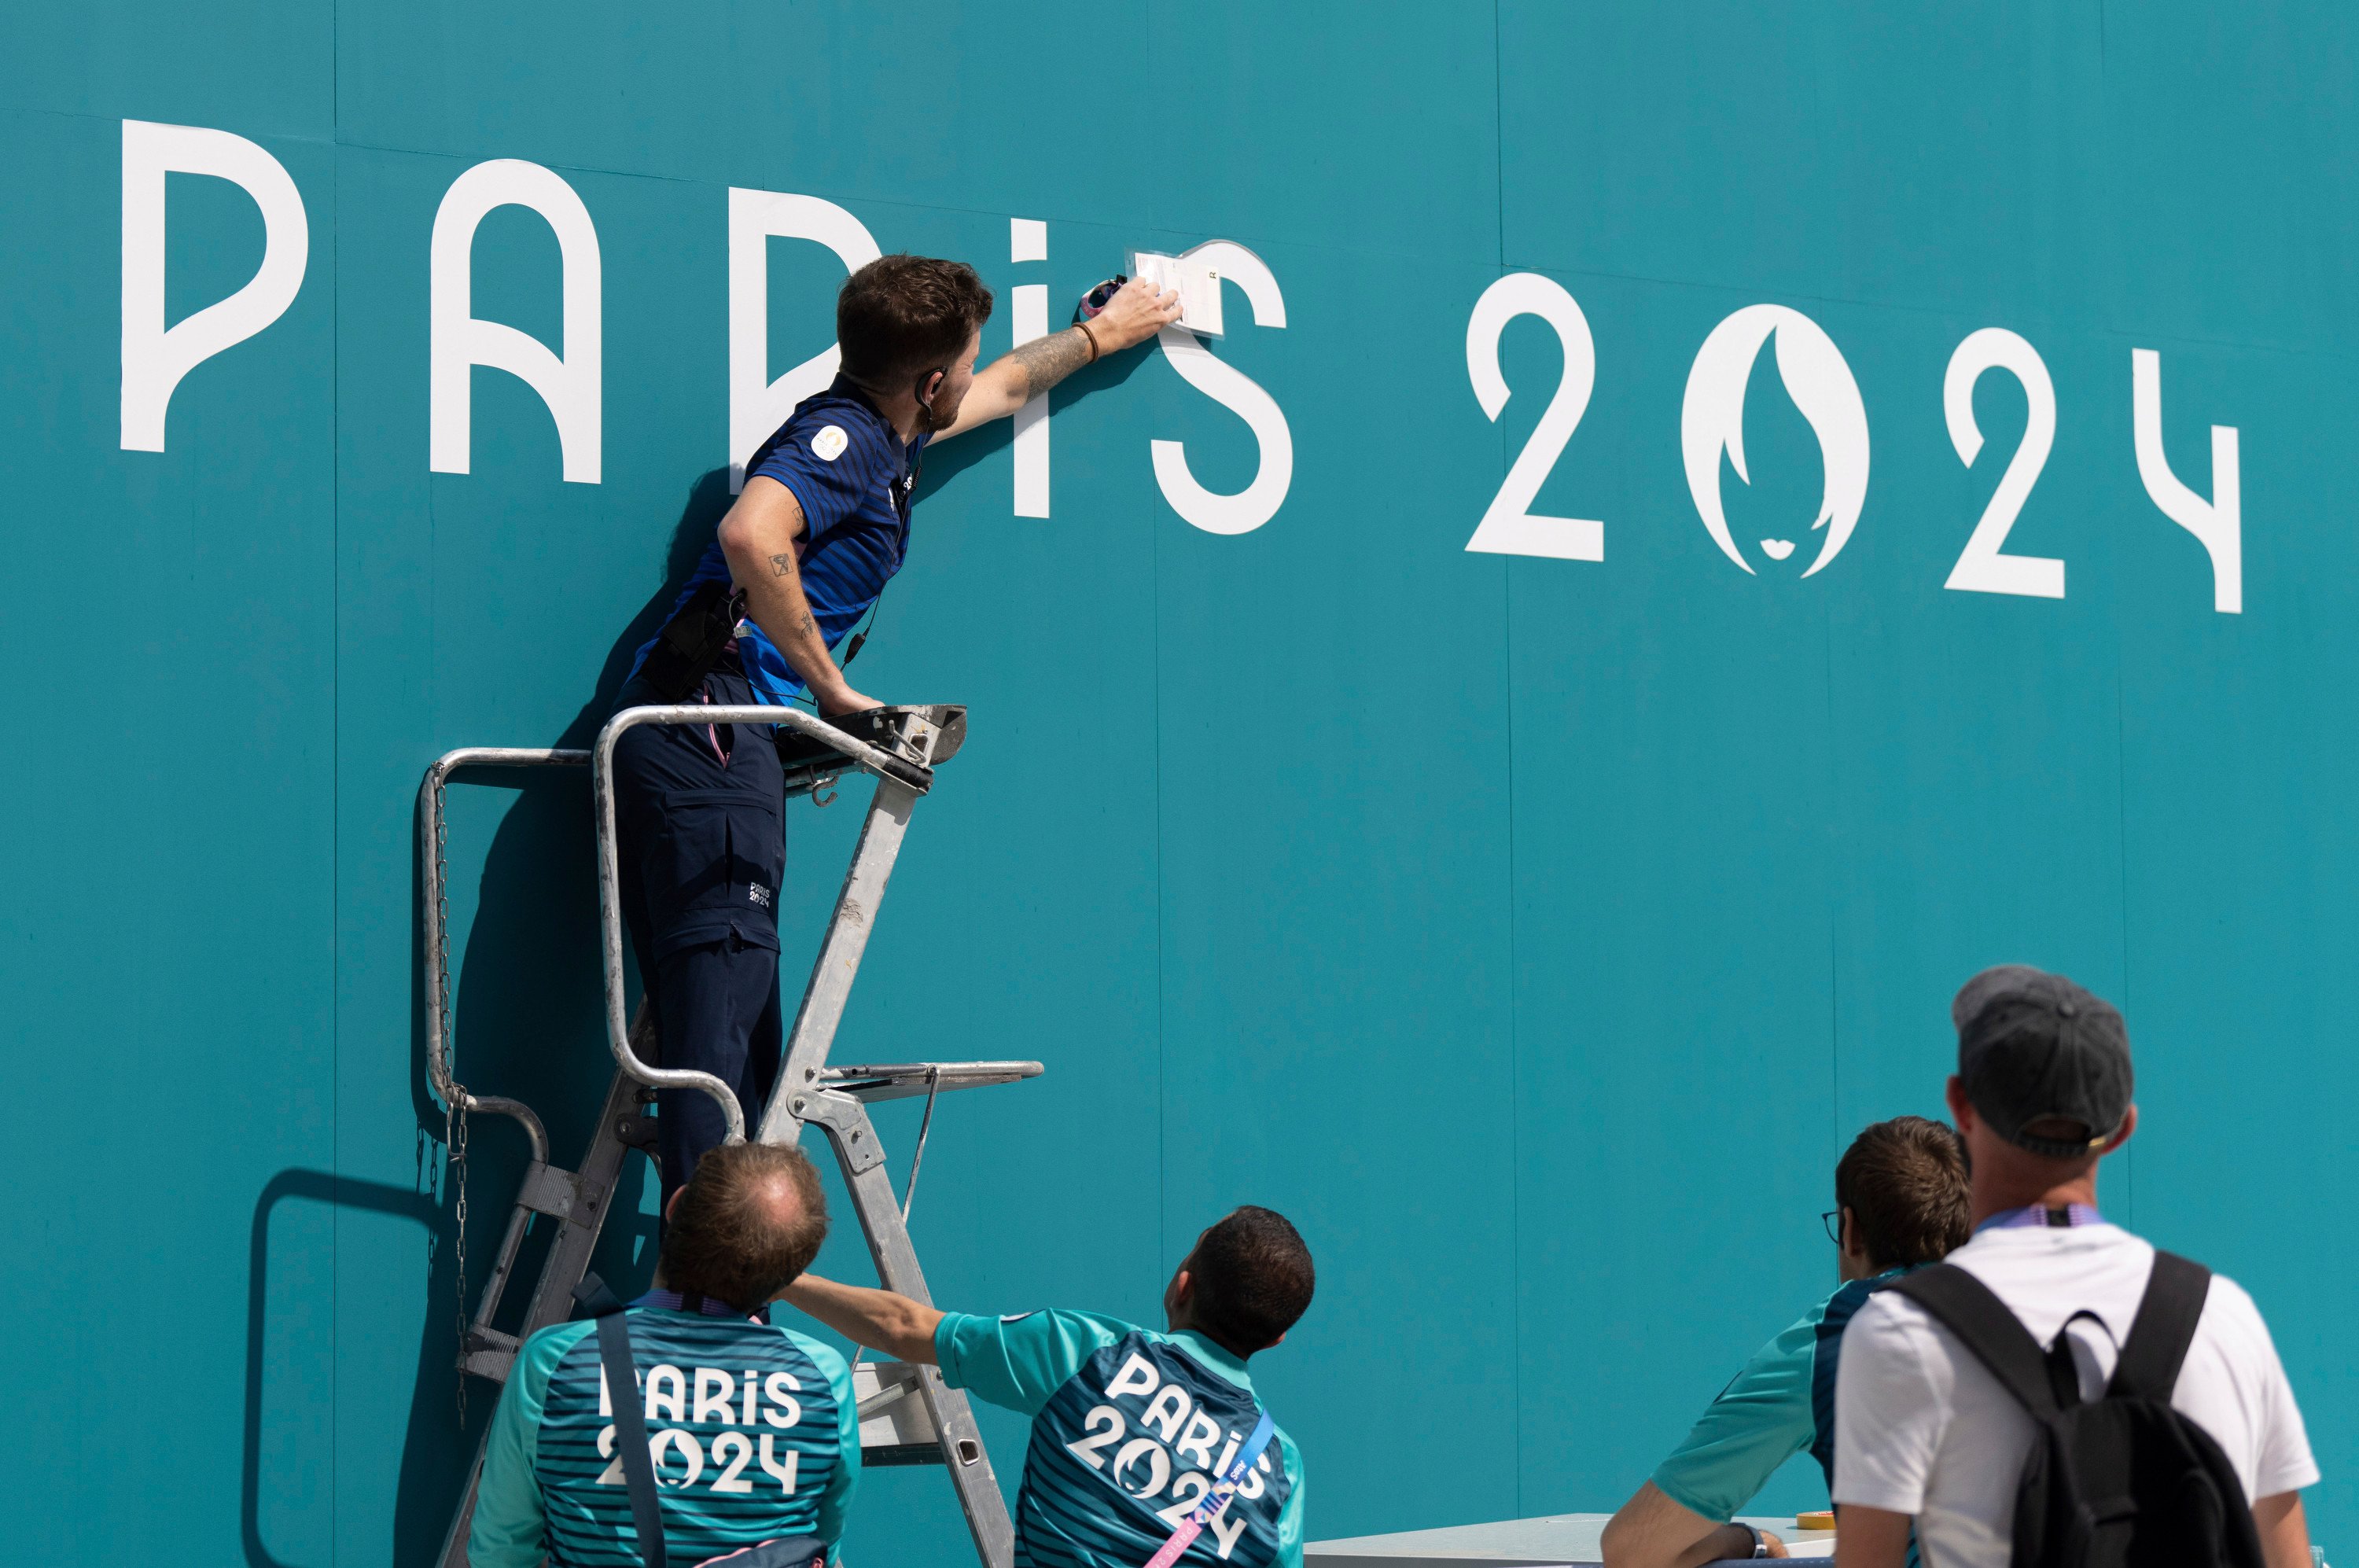 A volunteer fixes a sign in the Olympic Village in Paris. Photo: AP